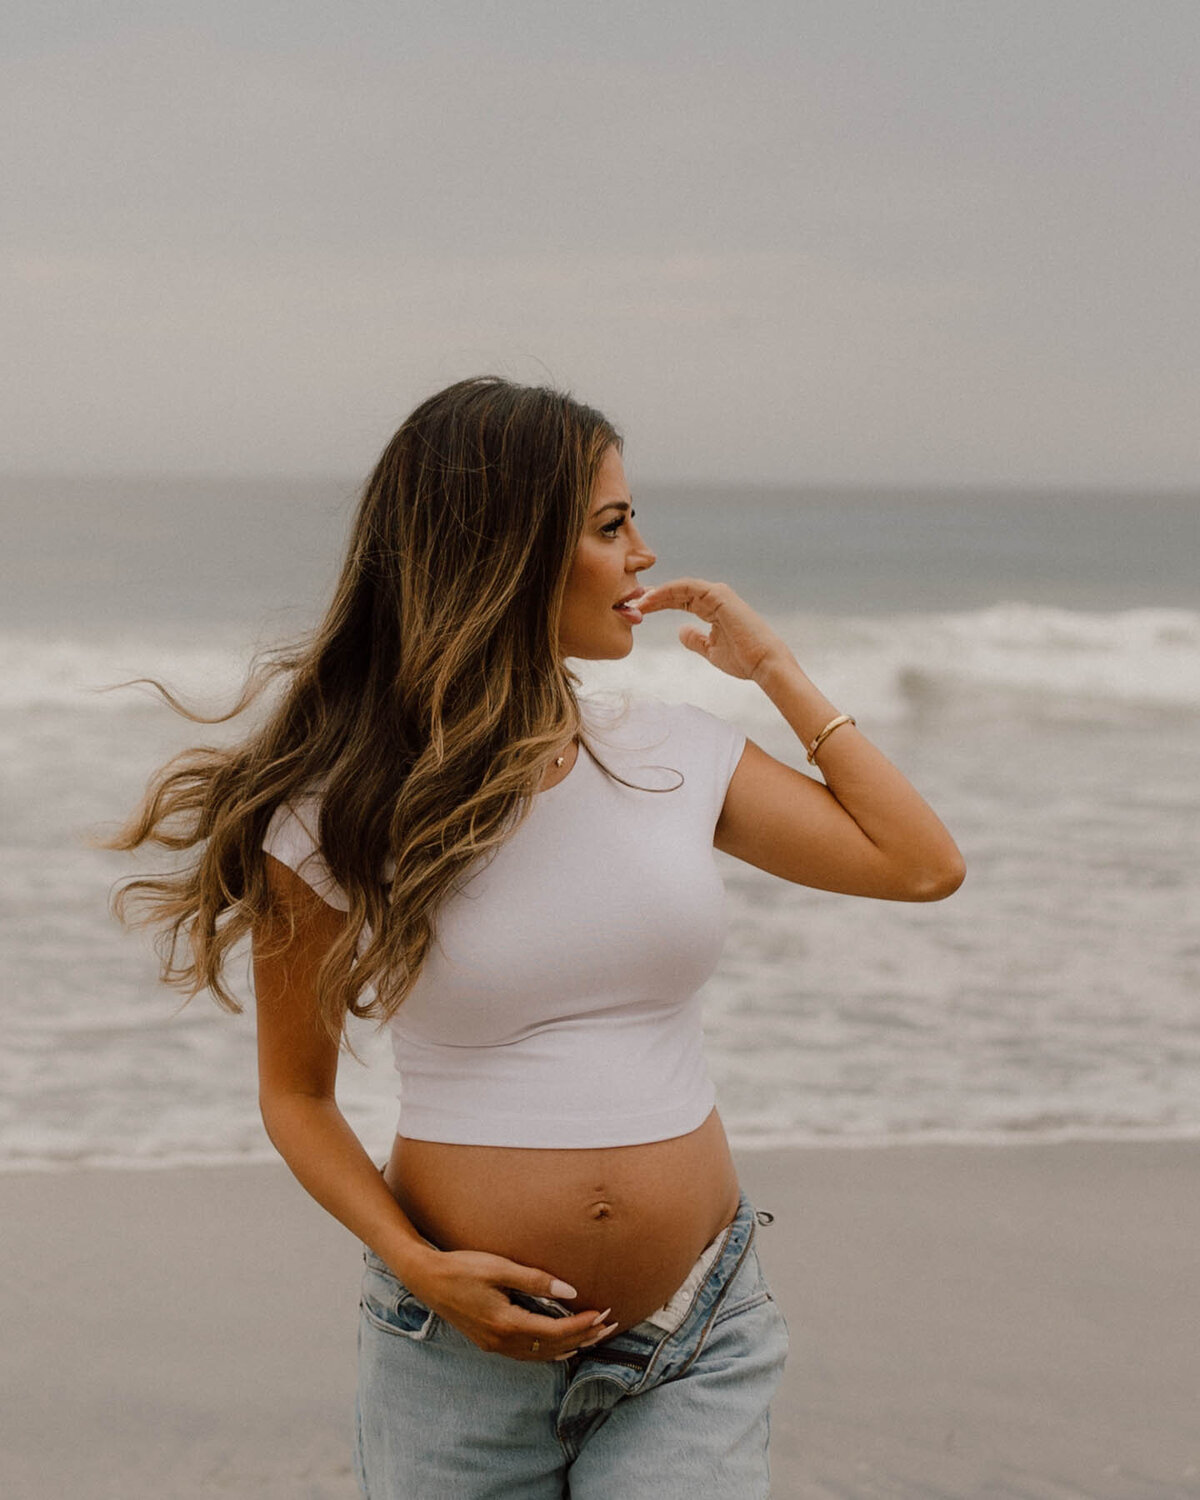 mama to be holding an ultrasound photo with husband against belly